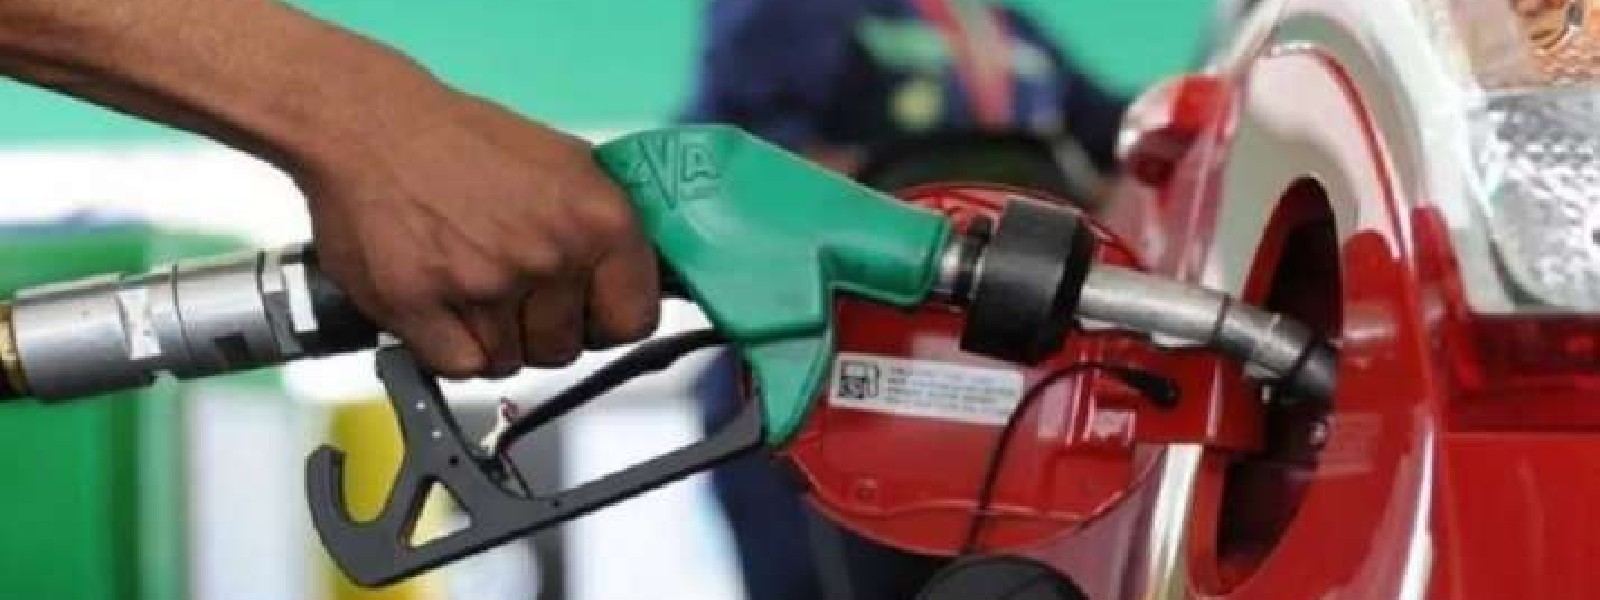 NO fuel shortage, says Minister; CPC to take action against dealers who failed to maintain stocks